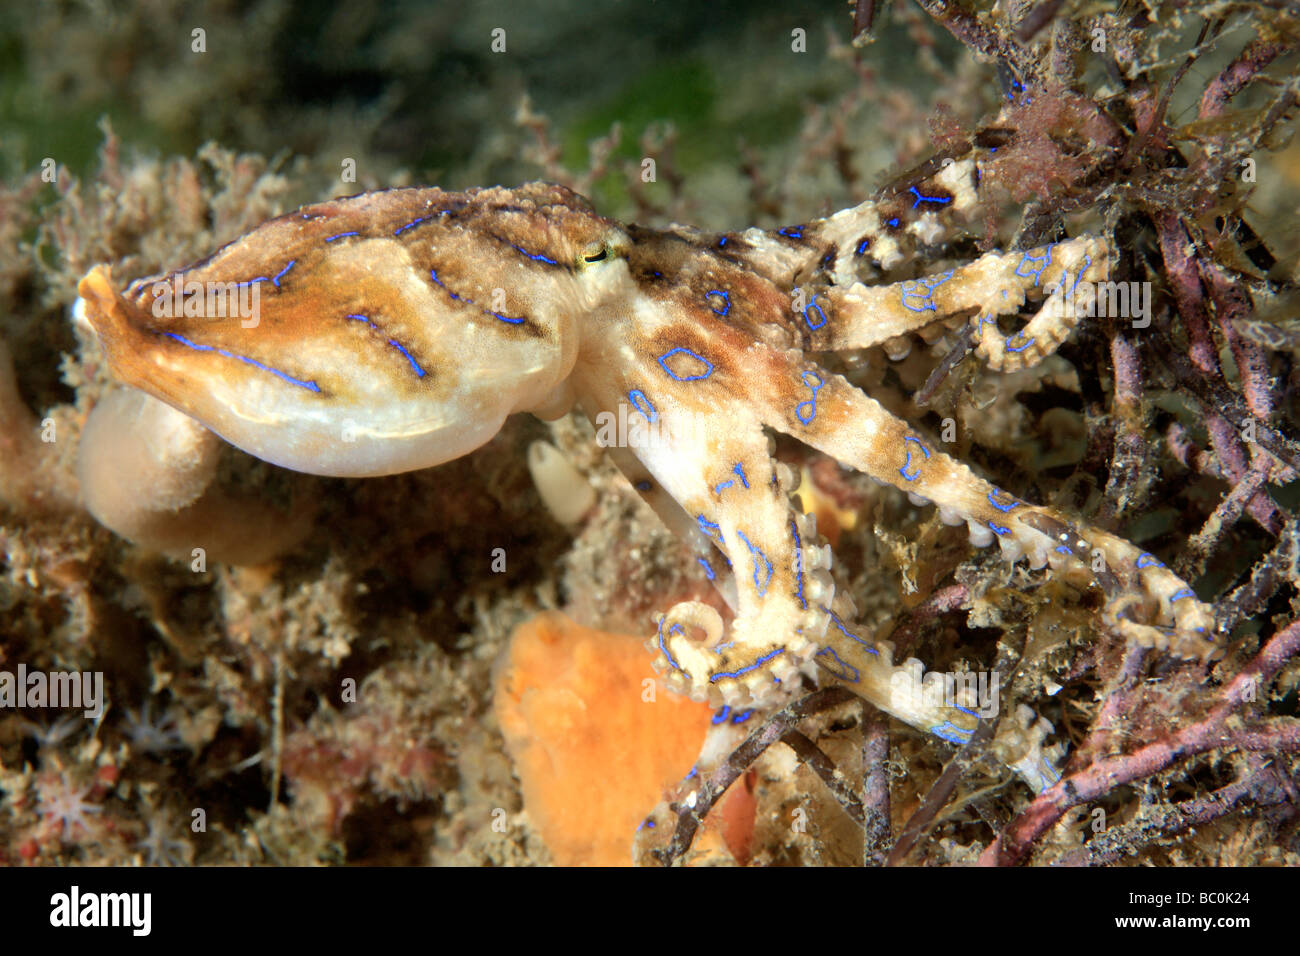 Venomous Southern blue-ringed Octopus, Hapalochlaena fasciata. This octopus  can inject a powerful neurotoxin that can kill Stock Photo - Alamy